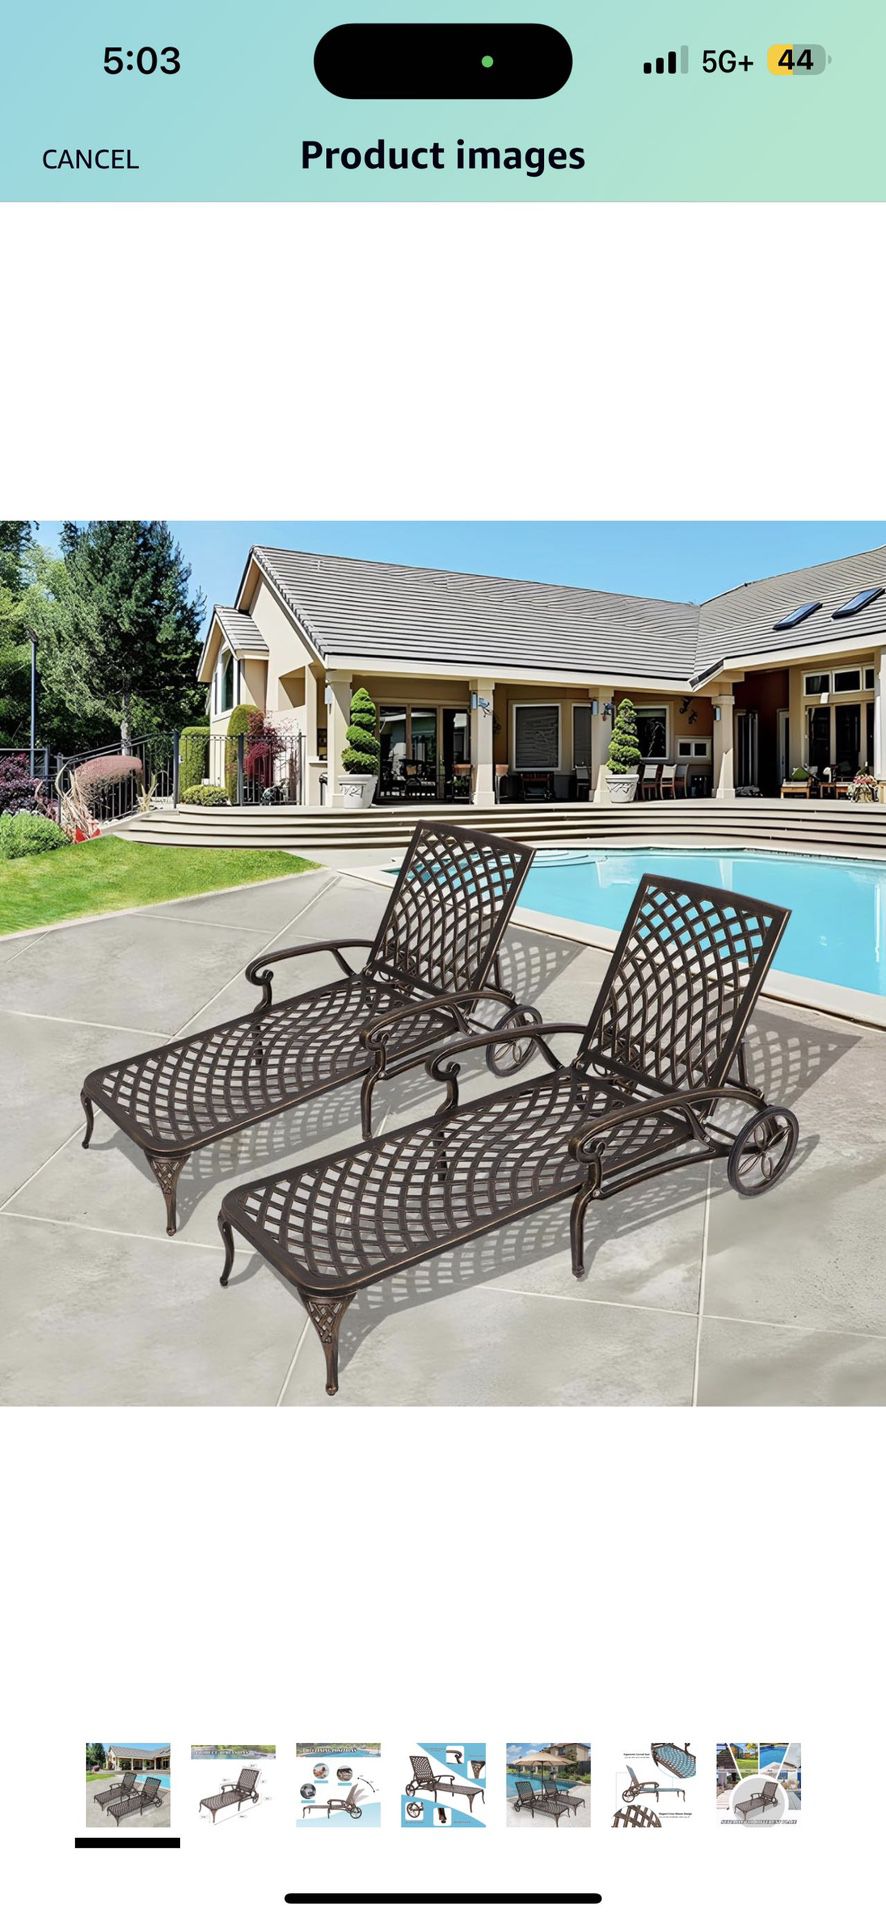 Outdoor Chaise Lounge Chairs Set of 2, Patio Cast Aluminum Lounge Chaise Chairs for Outside Pool, Adjustable Daybed, Patio Seating Pool Furniture Beac